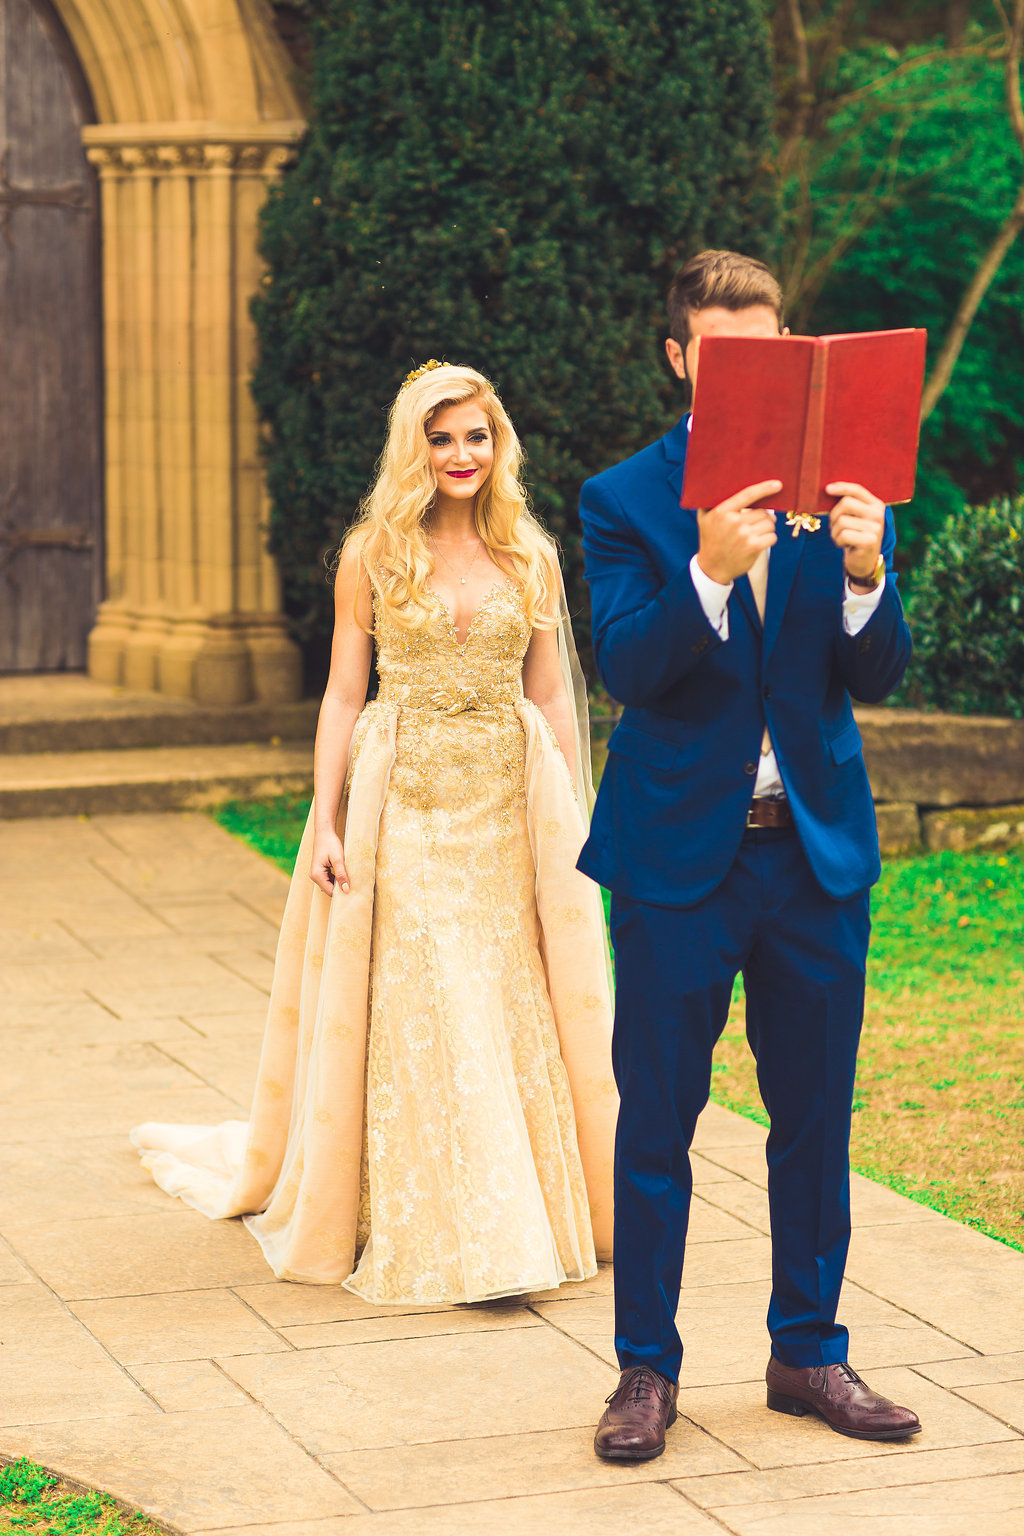 Wedding Photograph Of Groom reading a Book and Bride Walking Los Angeles